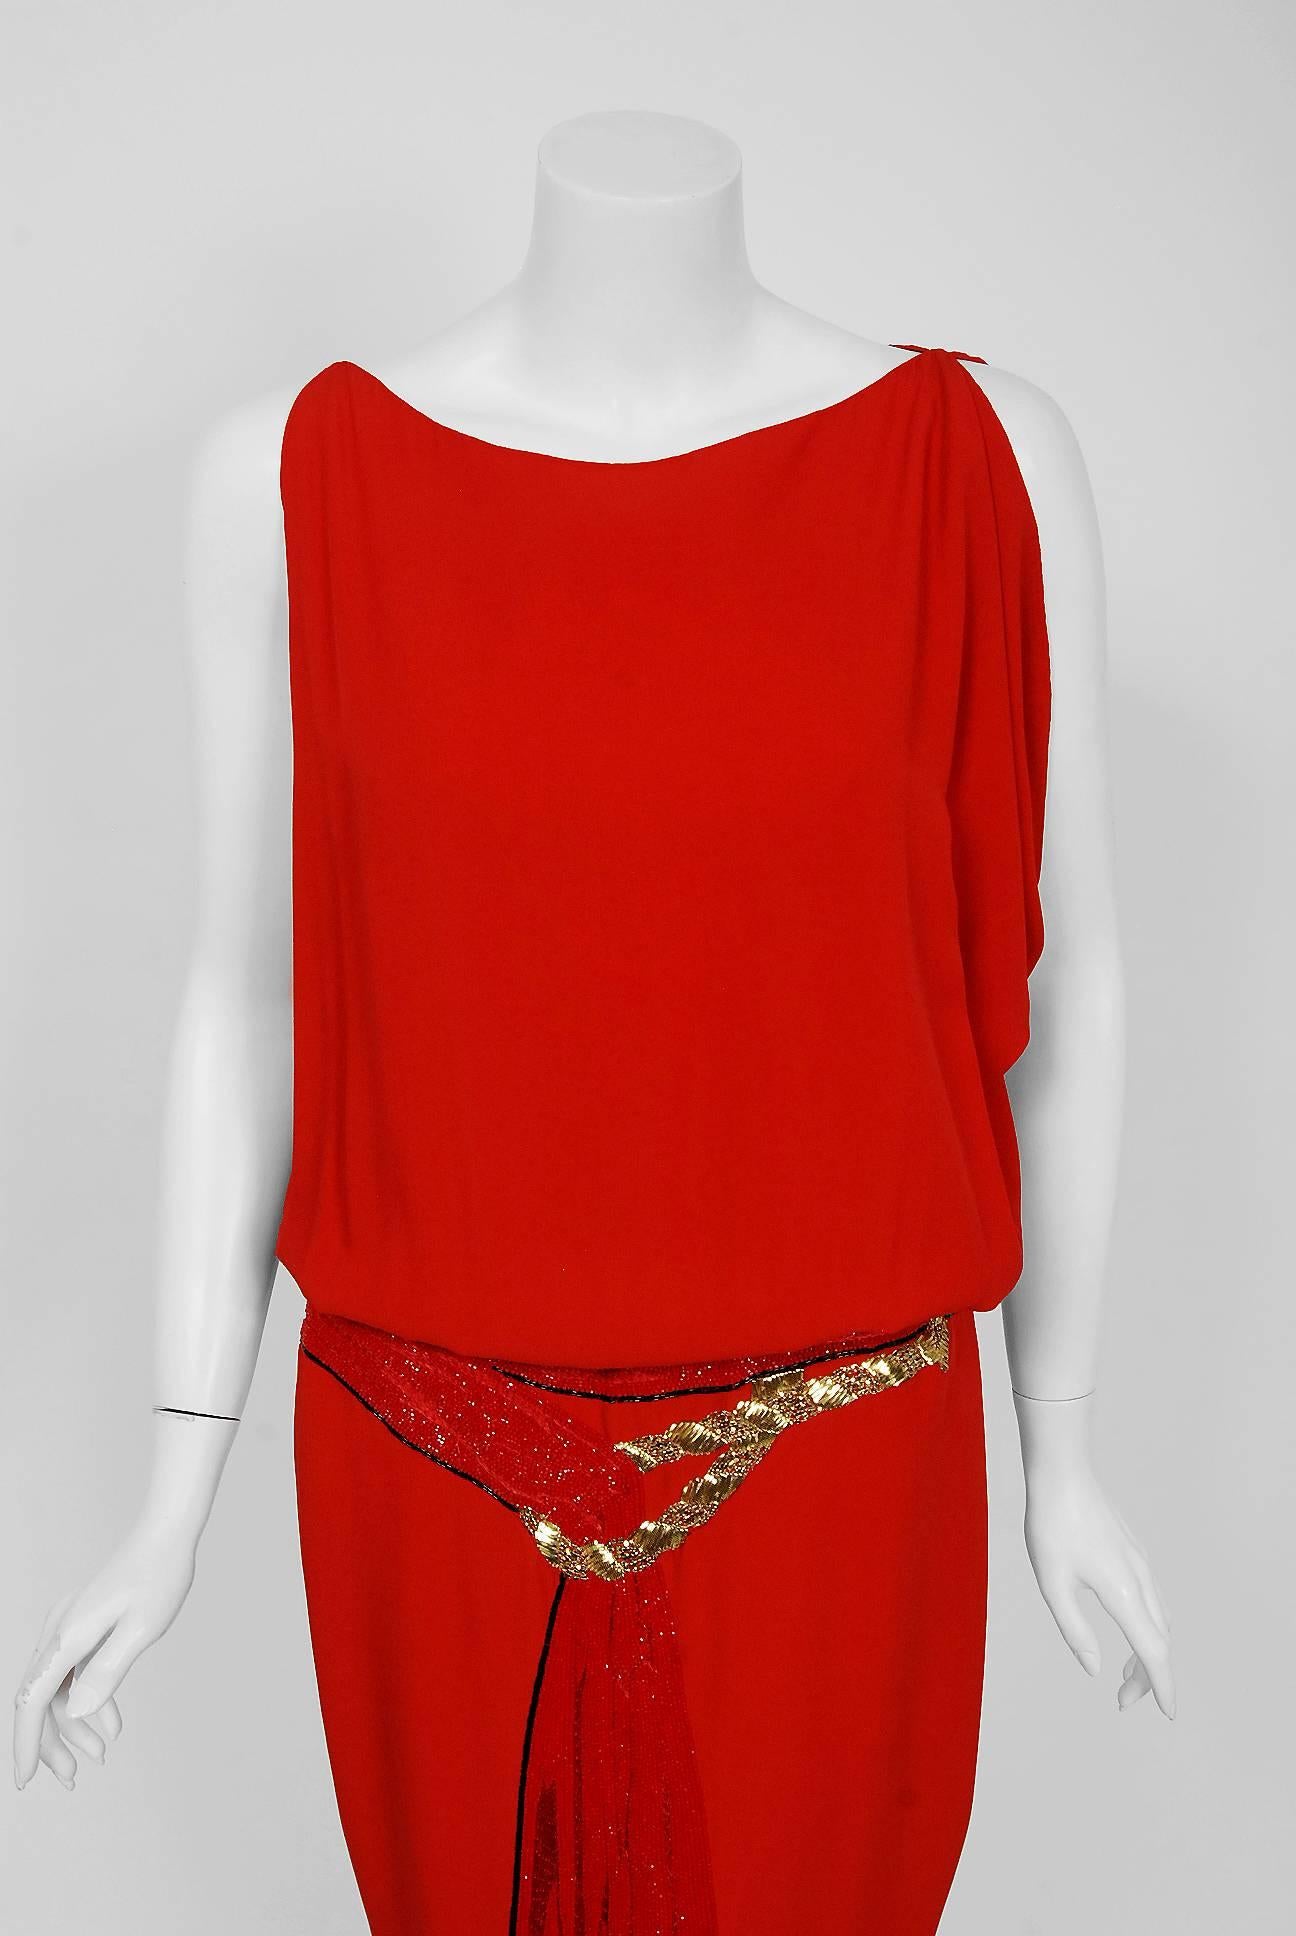 Gorgeous Bill Blass red silk-crepe beaded trompe l'oeil sash dress dating back to his 1979 collection. Building upon the innovations of European designers such as Coco Chanel, Blass made clothes that allowed women a modern sense of ease. He made